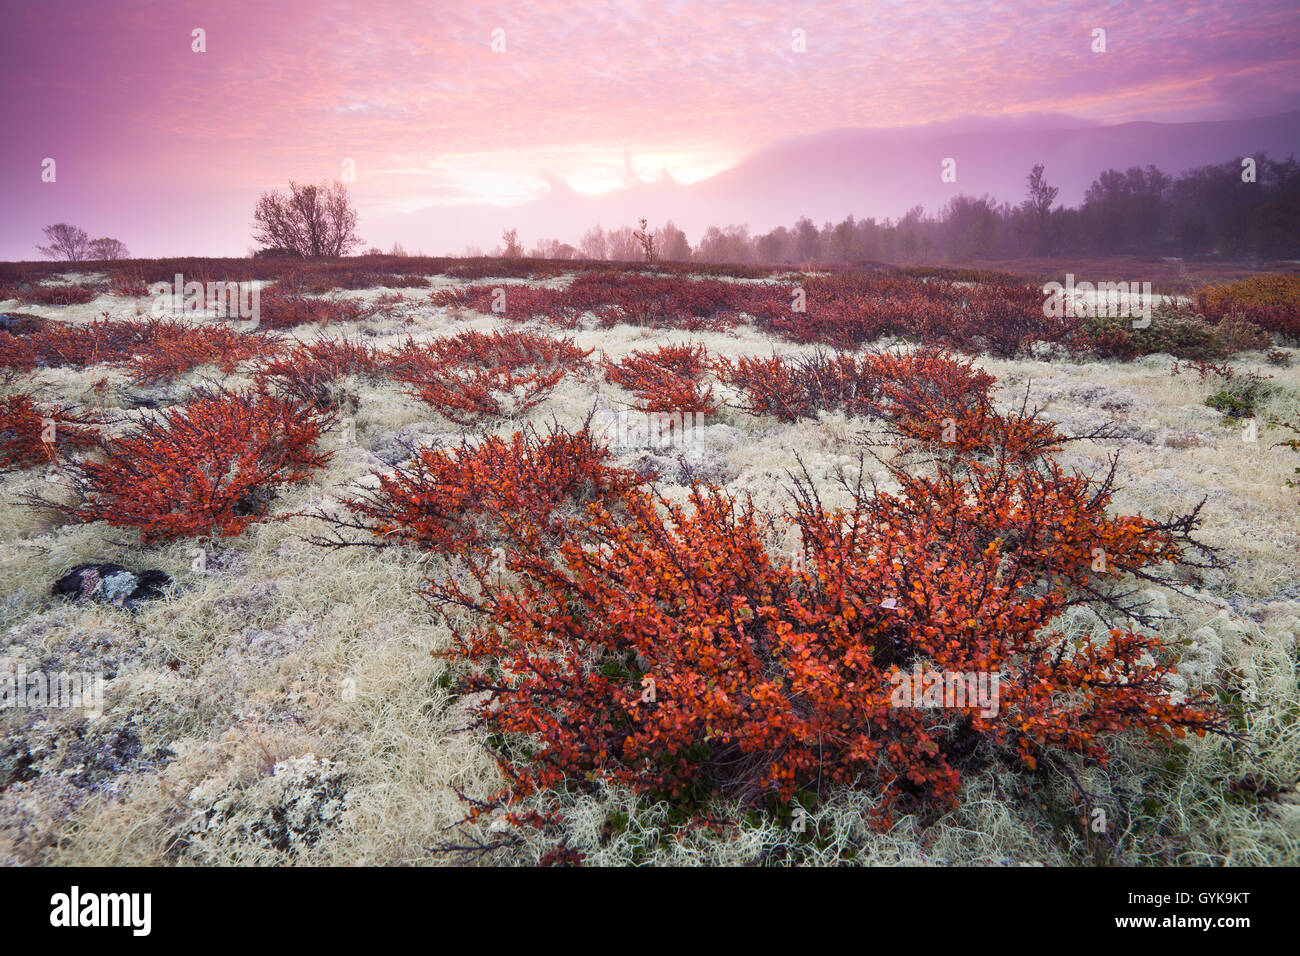 Fall colors and colorful sunrise at Fokstumyra nature reserve, Dovre, Oppland fylke, Norway. Stock Photo